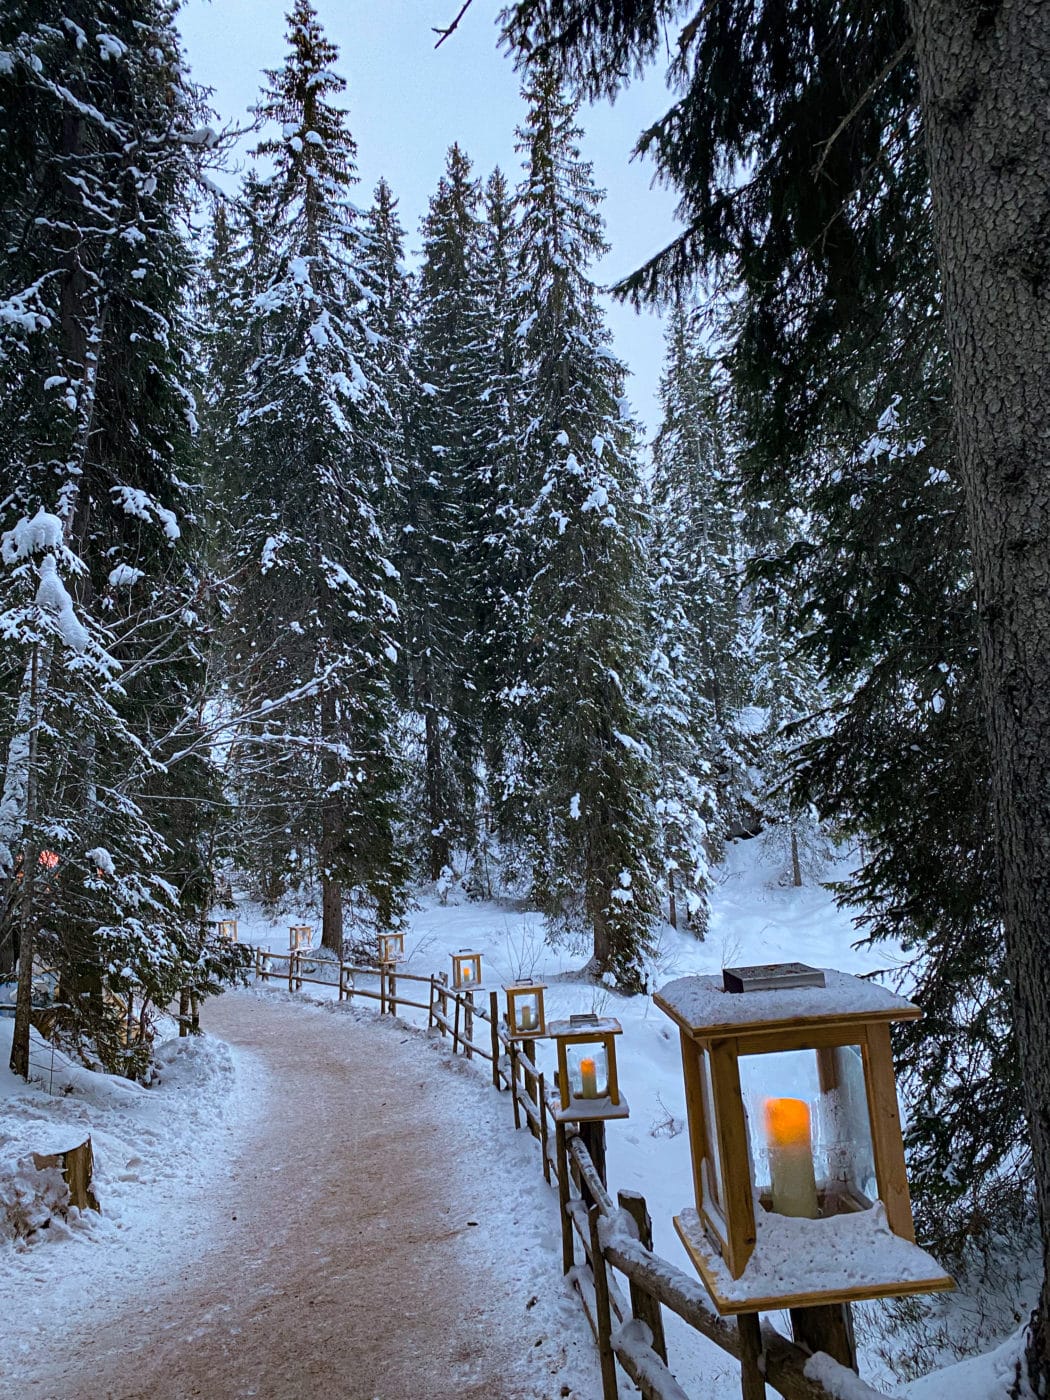 snowy path in the woods lit by lanterns in the dolomites, italy